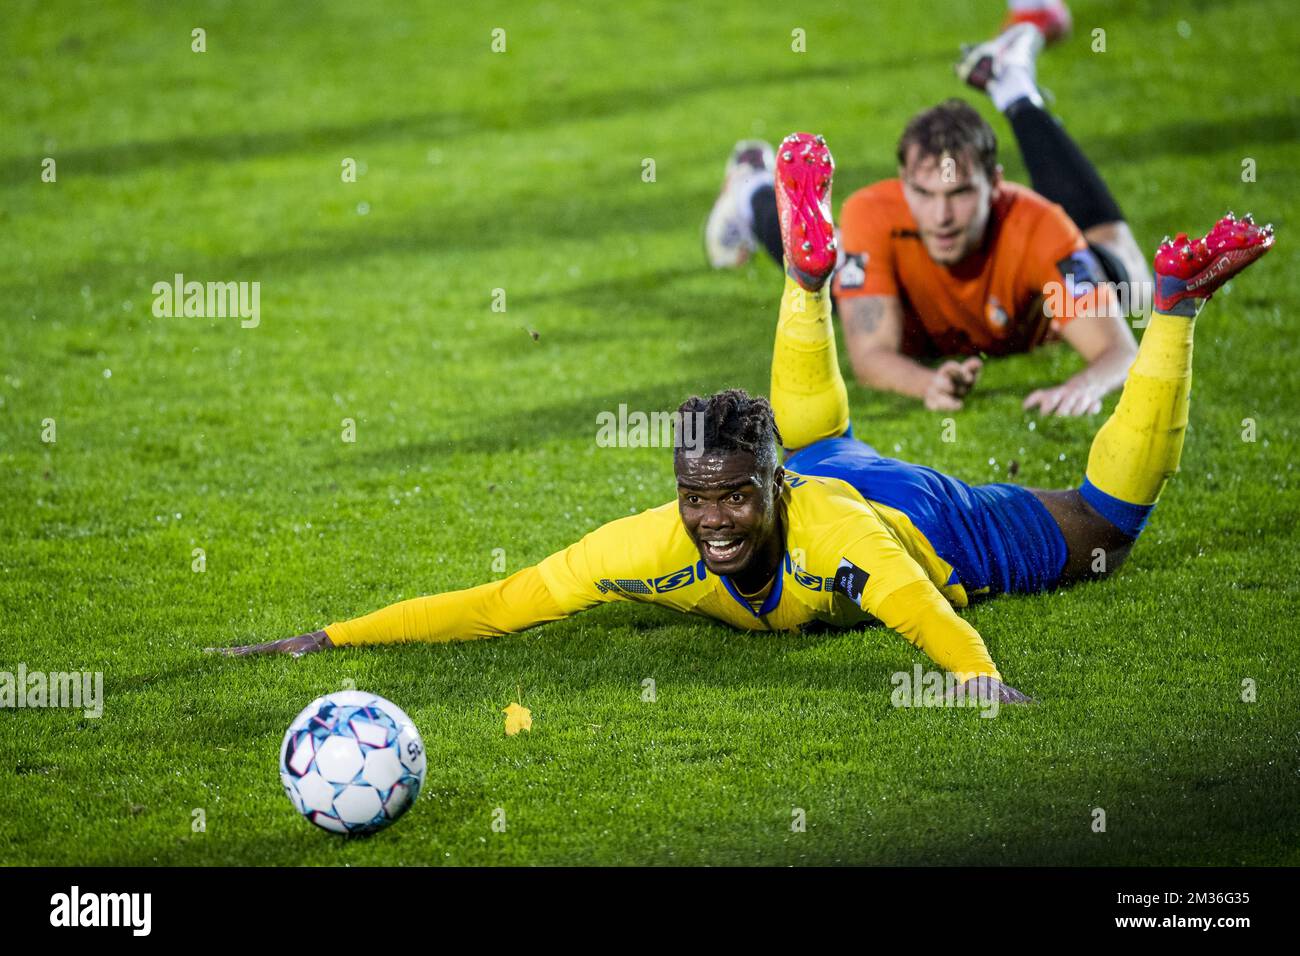 Westerlo's Kouya Mabea and Deinze's Lennart Mertens fight for the ball during a soccer match between KMSK Deinze and KVC Westerlo, Sunday 31 October 2021 in Deinze, on day 10 of the '1B Pro League' second division of the Belgian soccer championship. BELGA PHOTO JASPER JACOBS Stock Photo